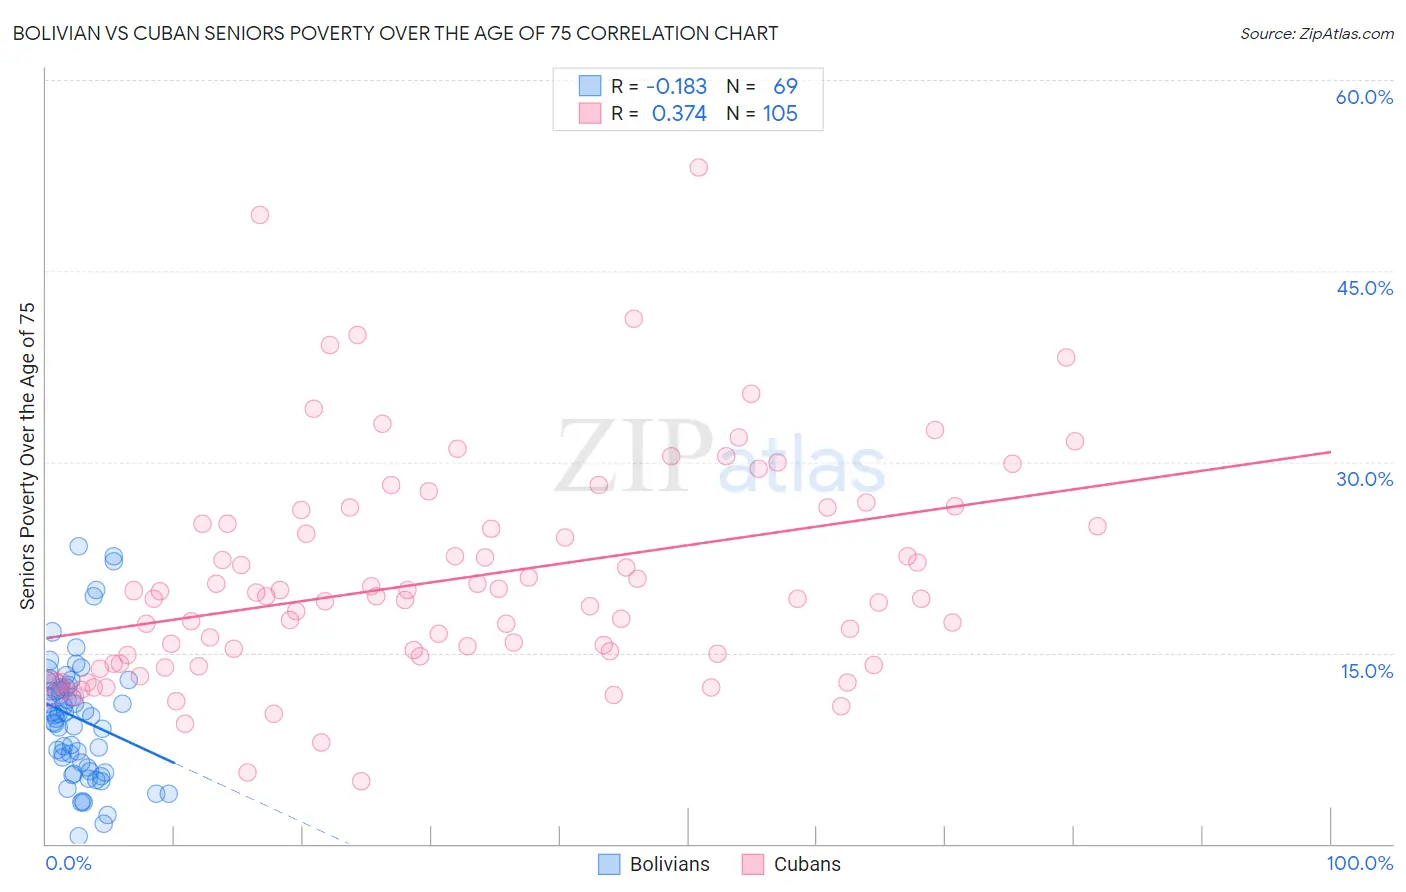 Bolivian vs Cuban Seniors Poverty Over the Age of 75